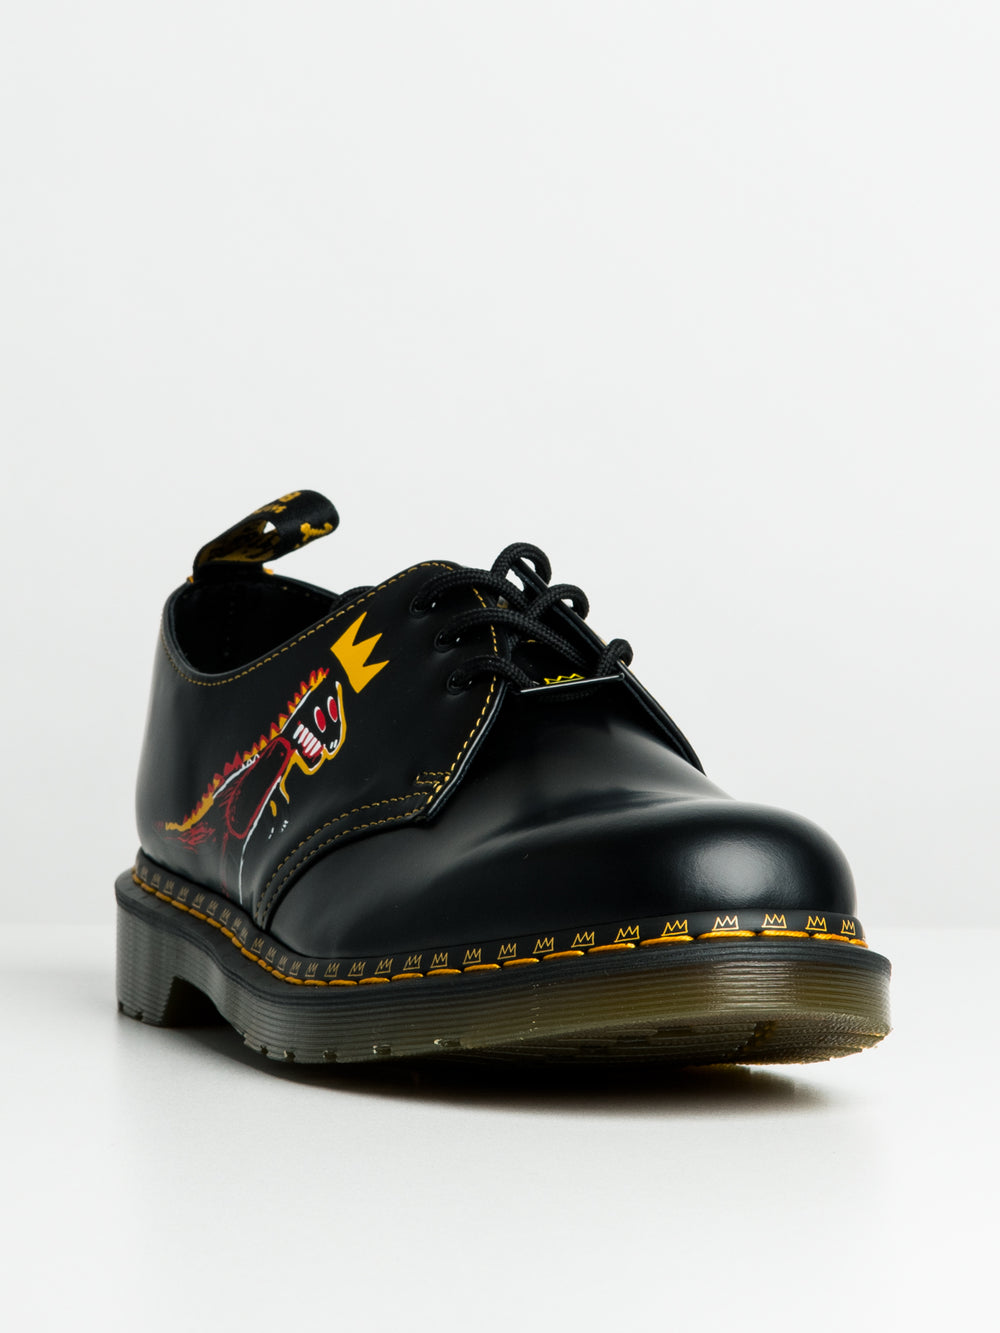 WOMENS DR MARTENS 1461 BASQUIAT SMOOTH BOOT - CLEARANCE